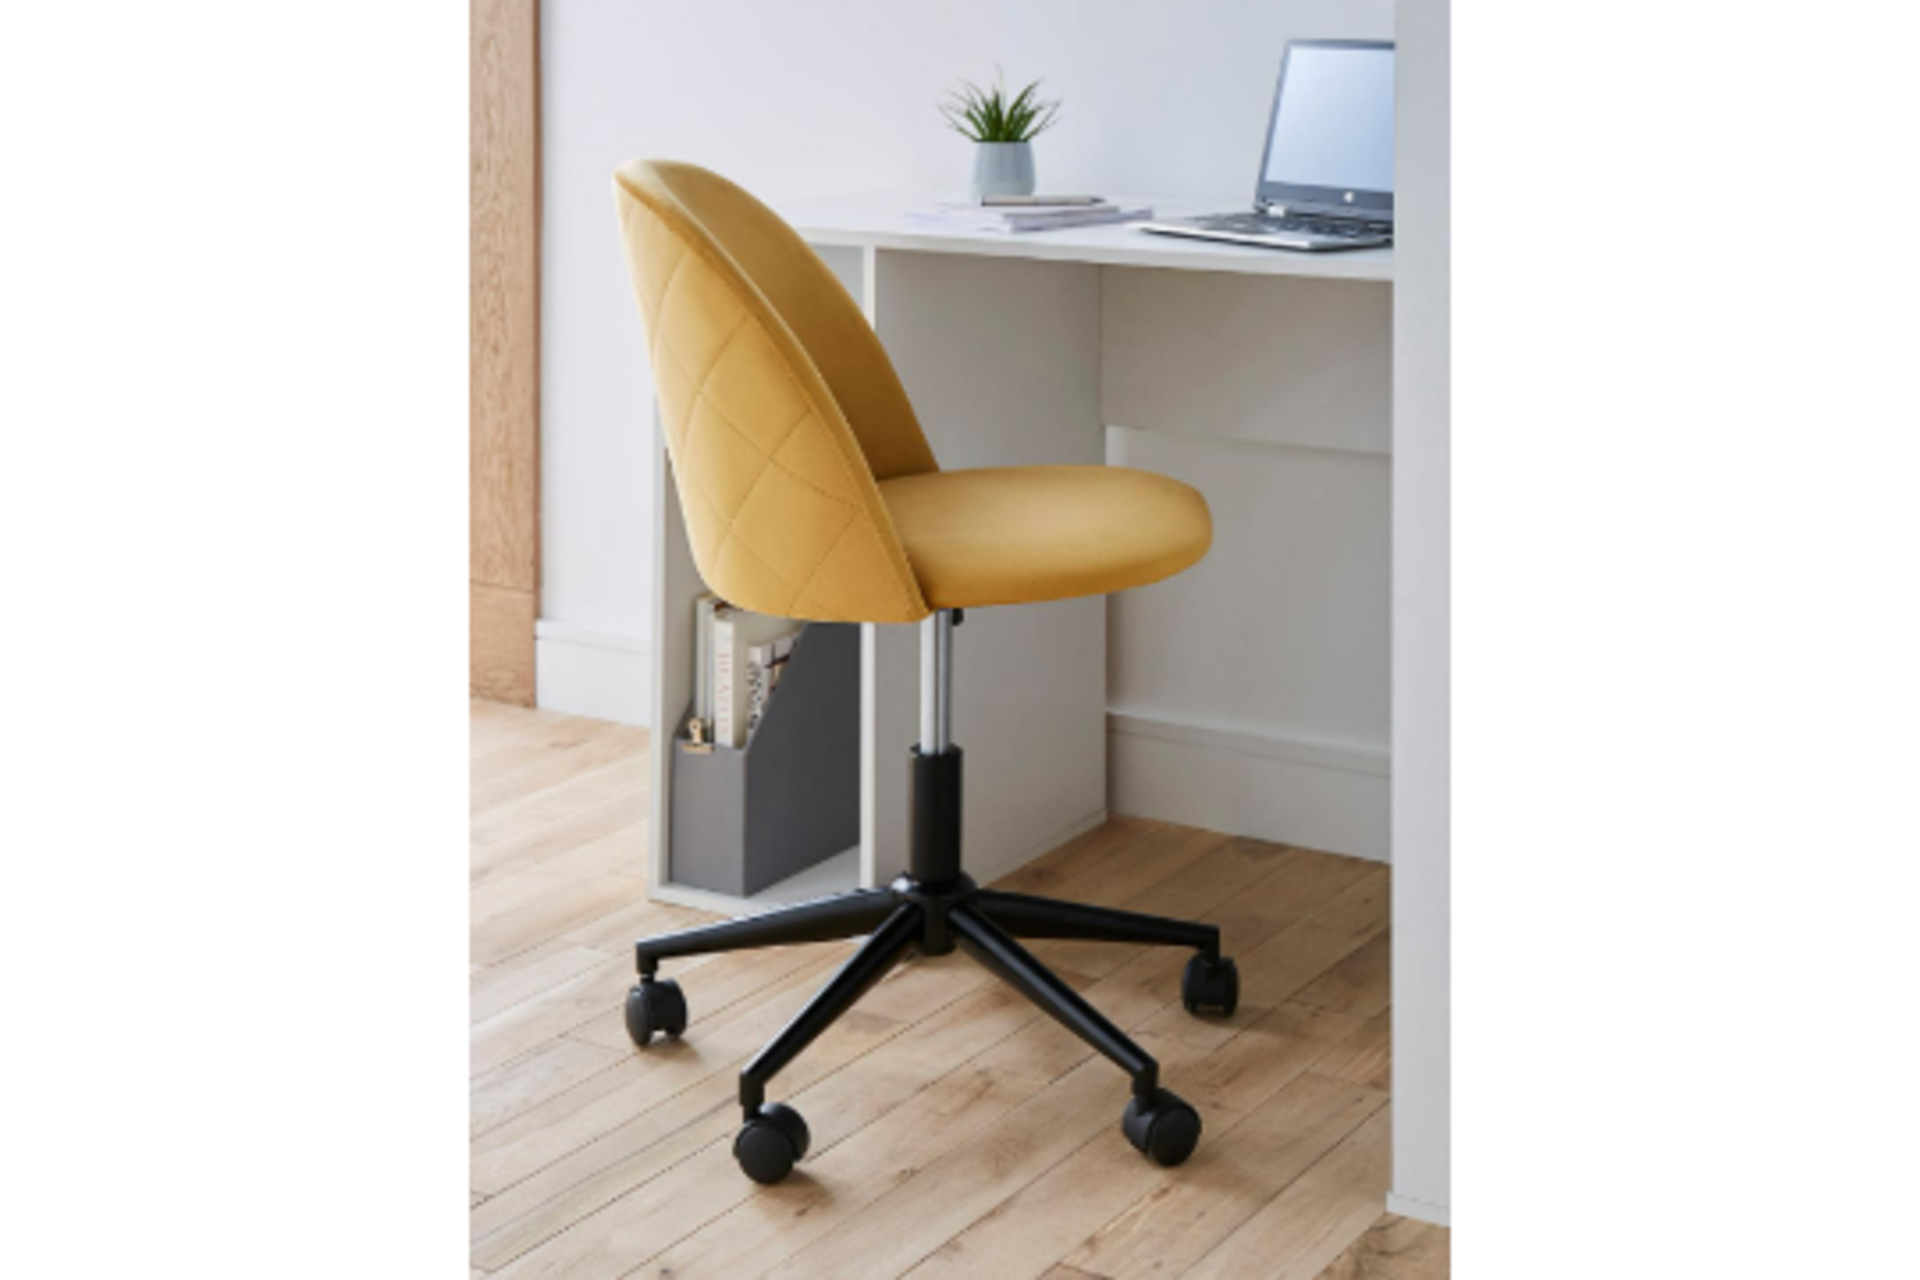 Brand New & Boxed Klara Office Chair - Ochre. RRP £199 each. The Klara Office Chair is a luxurious - Image 2 of 2